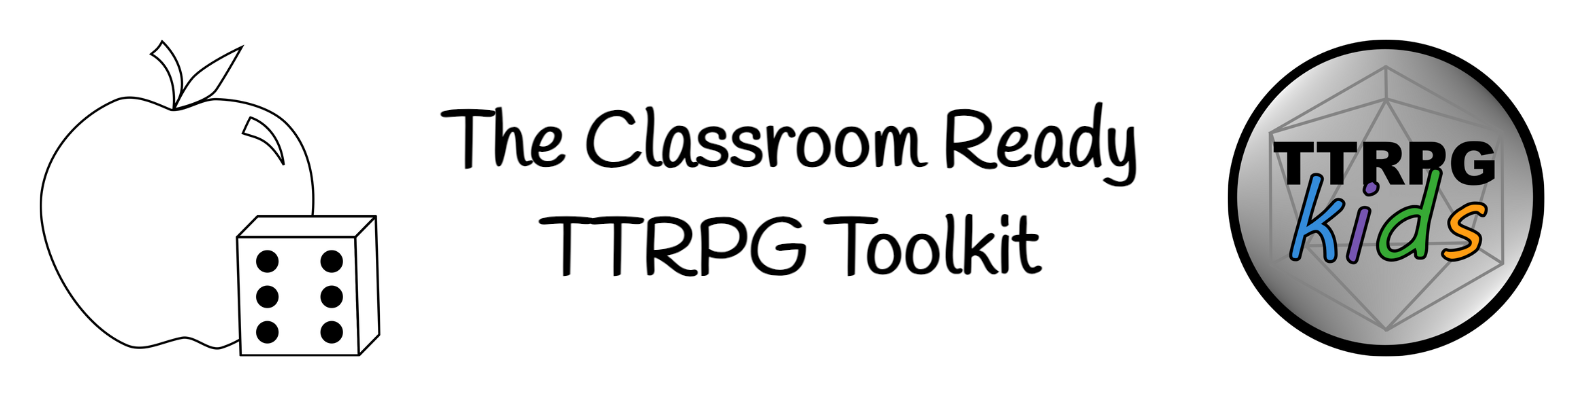 The Classroom Ready TTRPG Toolkit